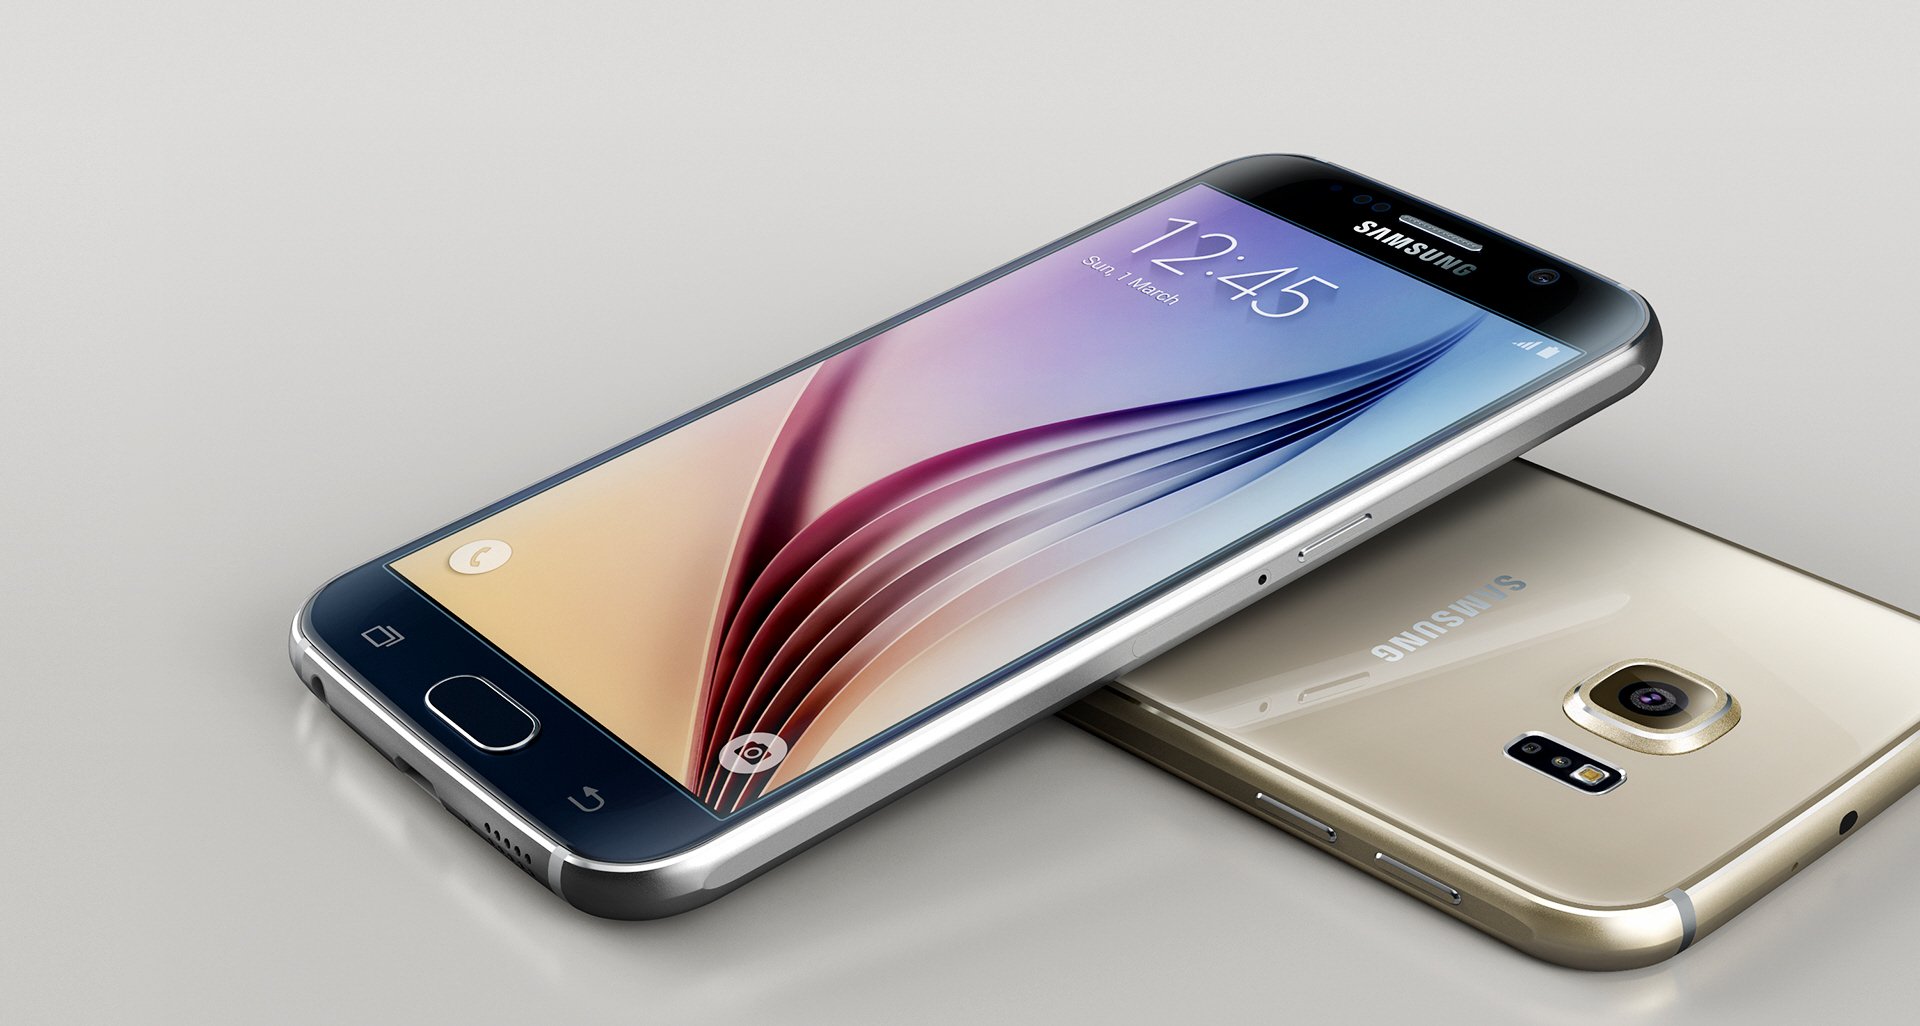 Unexpectedly: the old Samsung Galaxy S6, Galaxy S6 Edge and Galaxy S6 Edge+ smartphones received a new software update